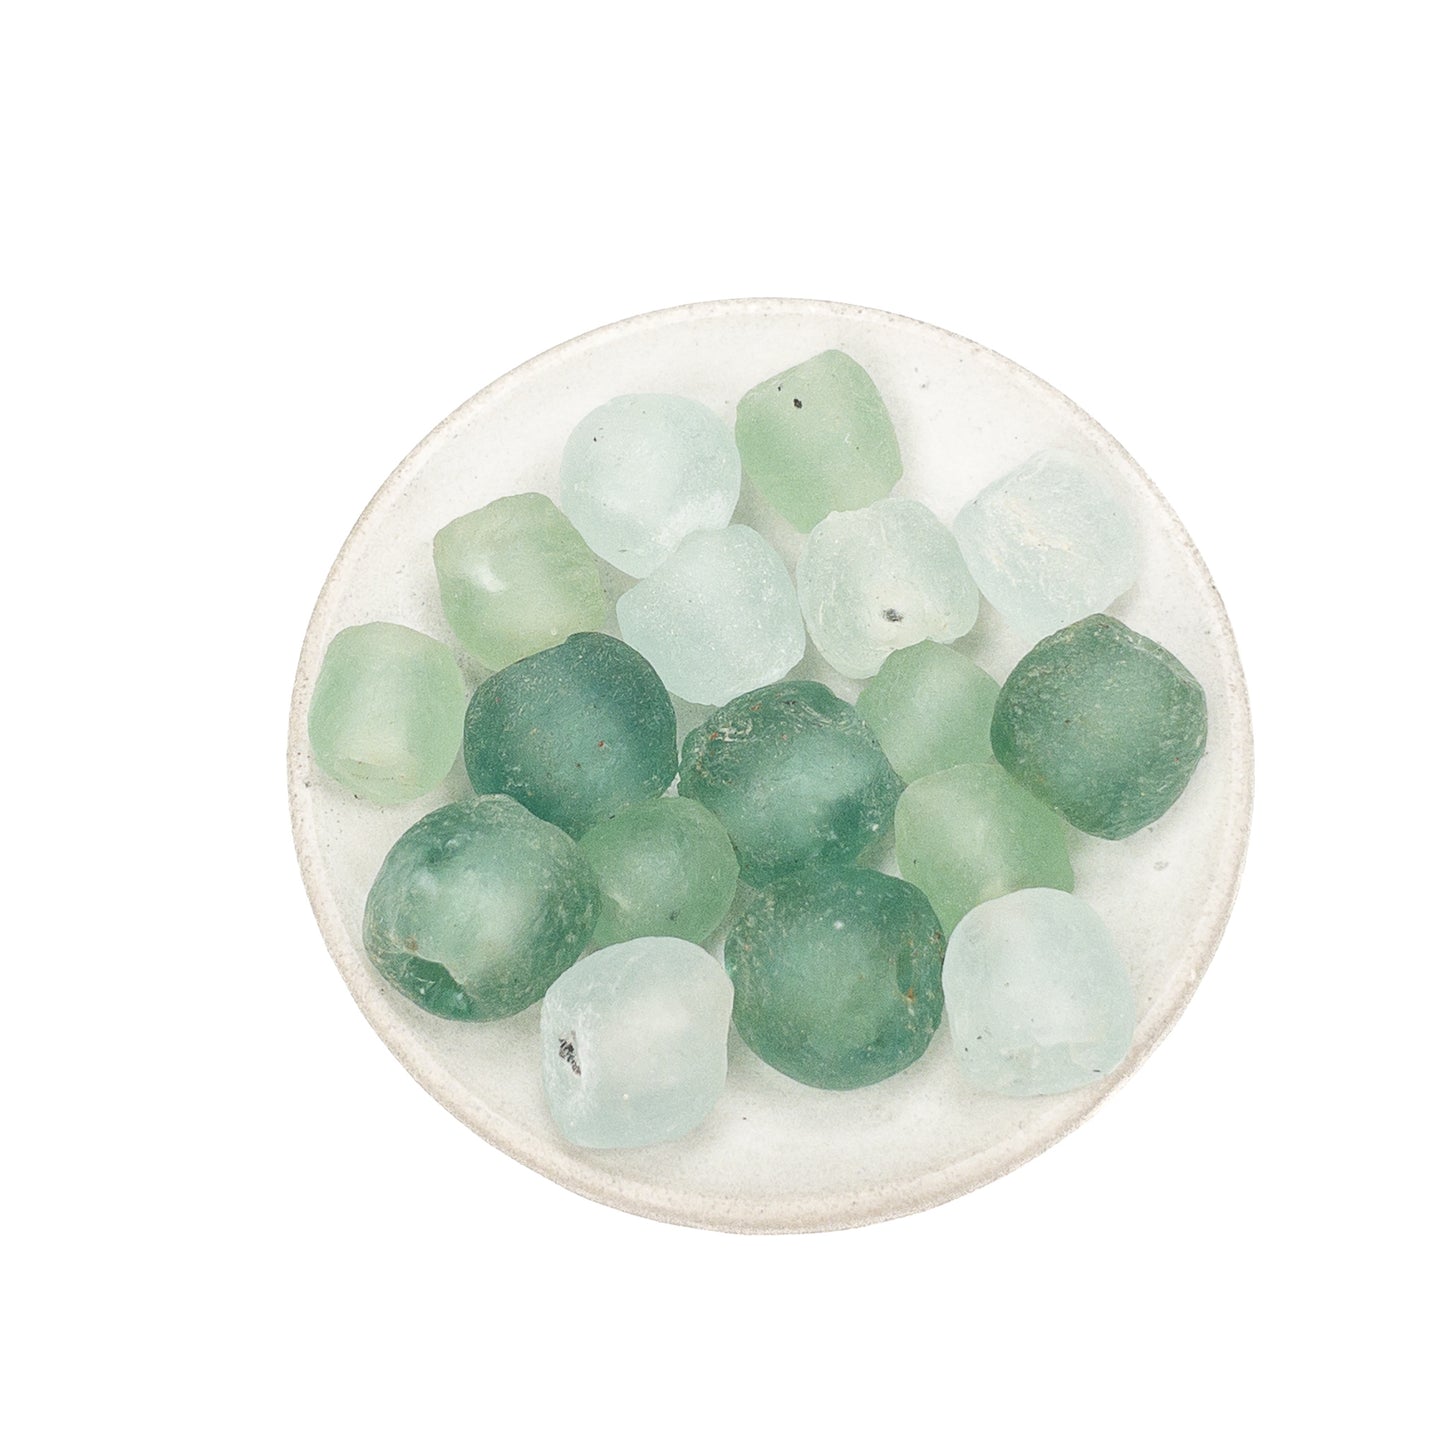 African Recycled Glass Rustic Bead Mix (13 Options Available)